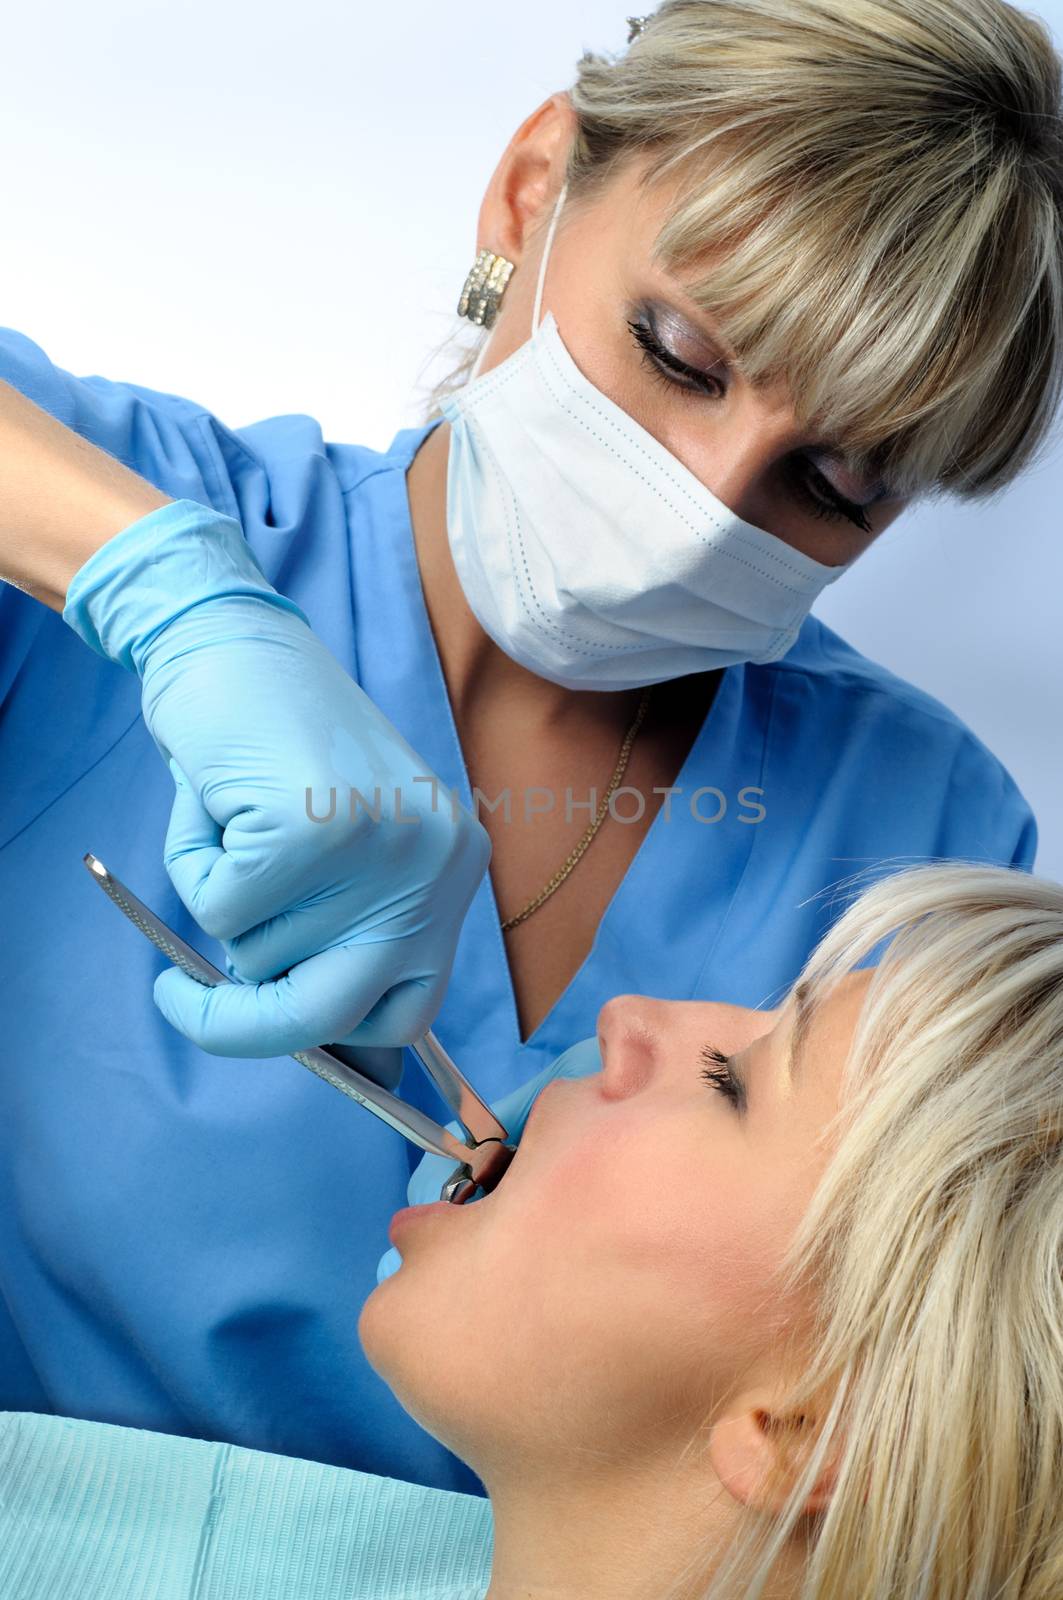 Dentist at work, tooth extraction using forceps